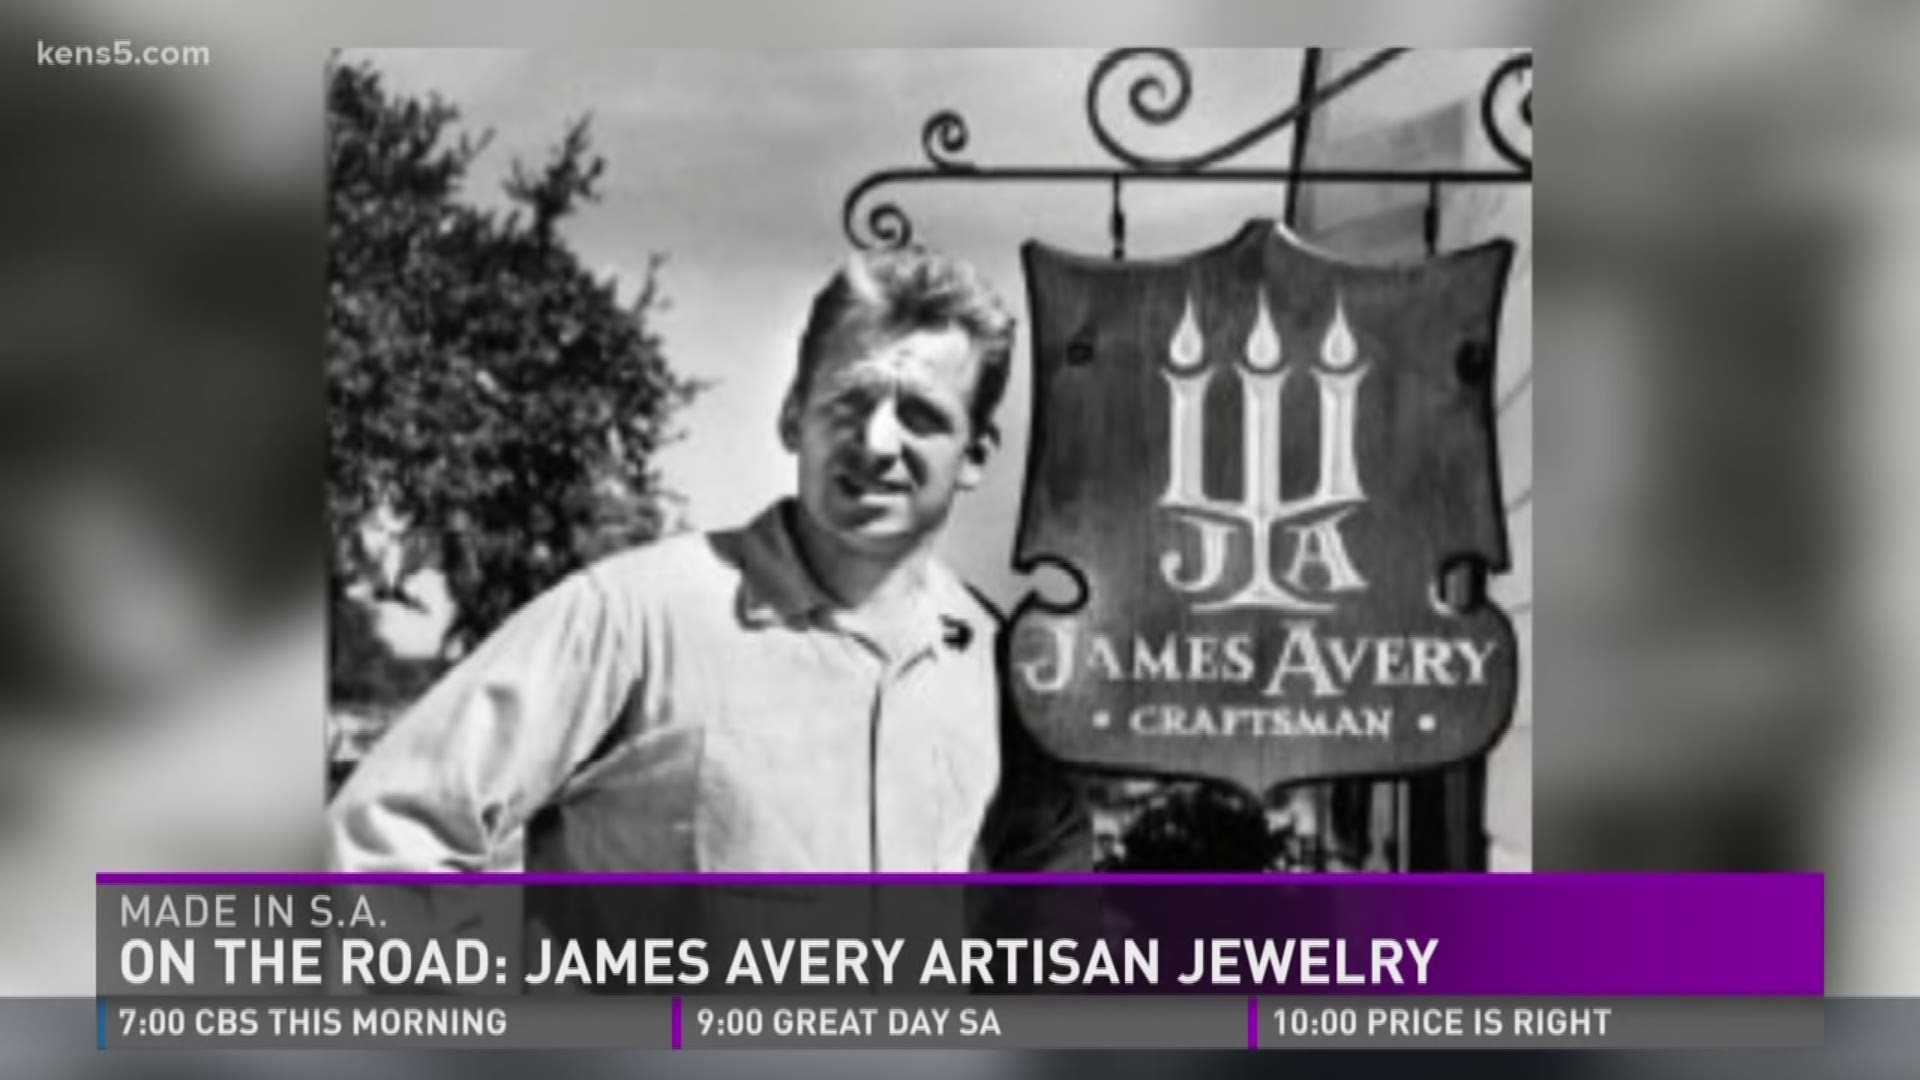 A look at the beginning of the iconic James Avery jewelry